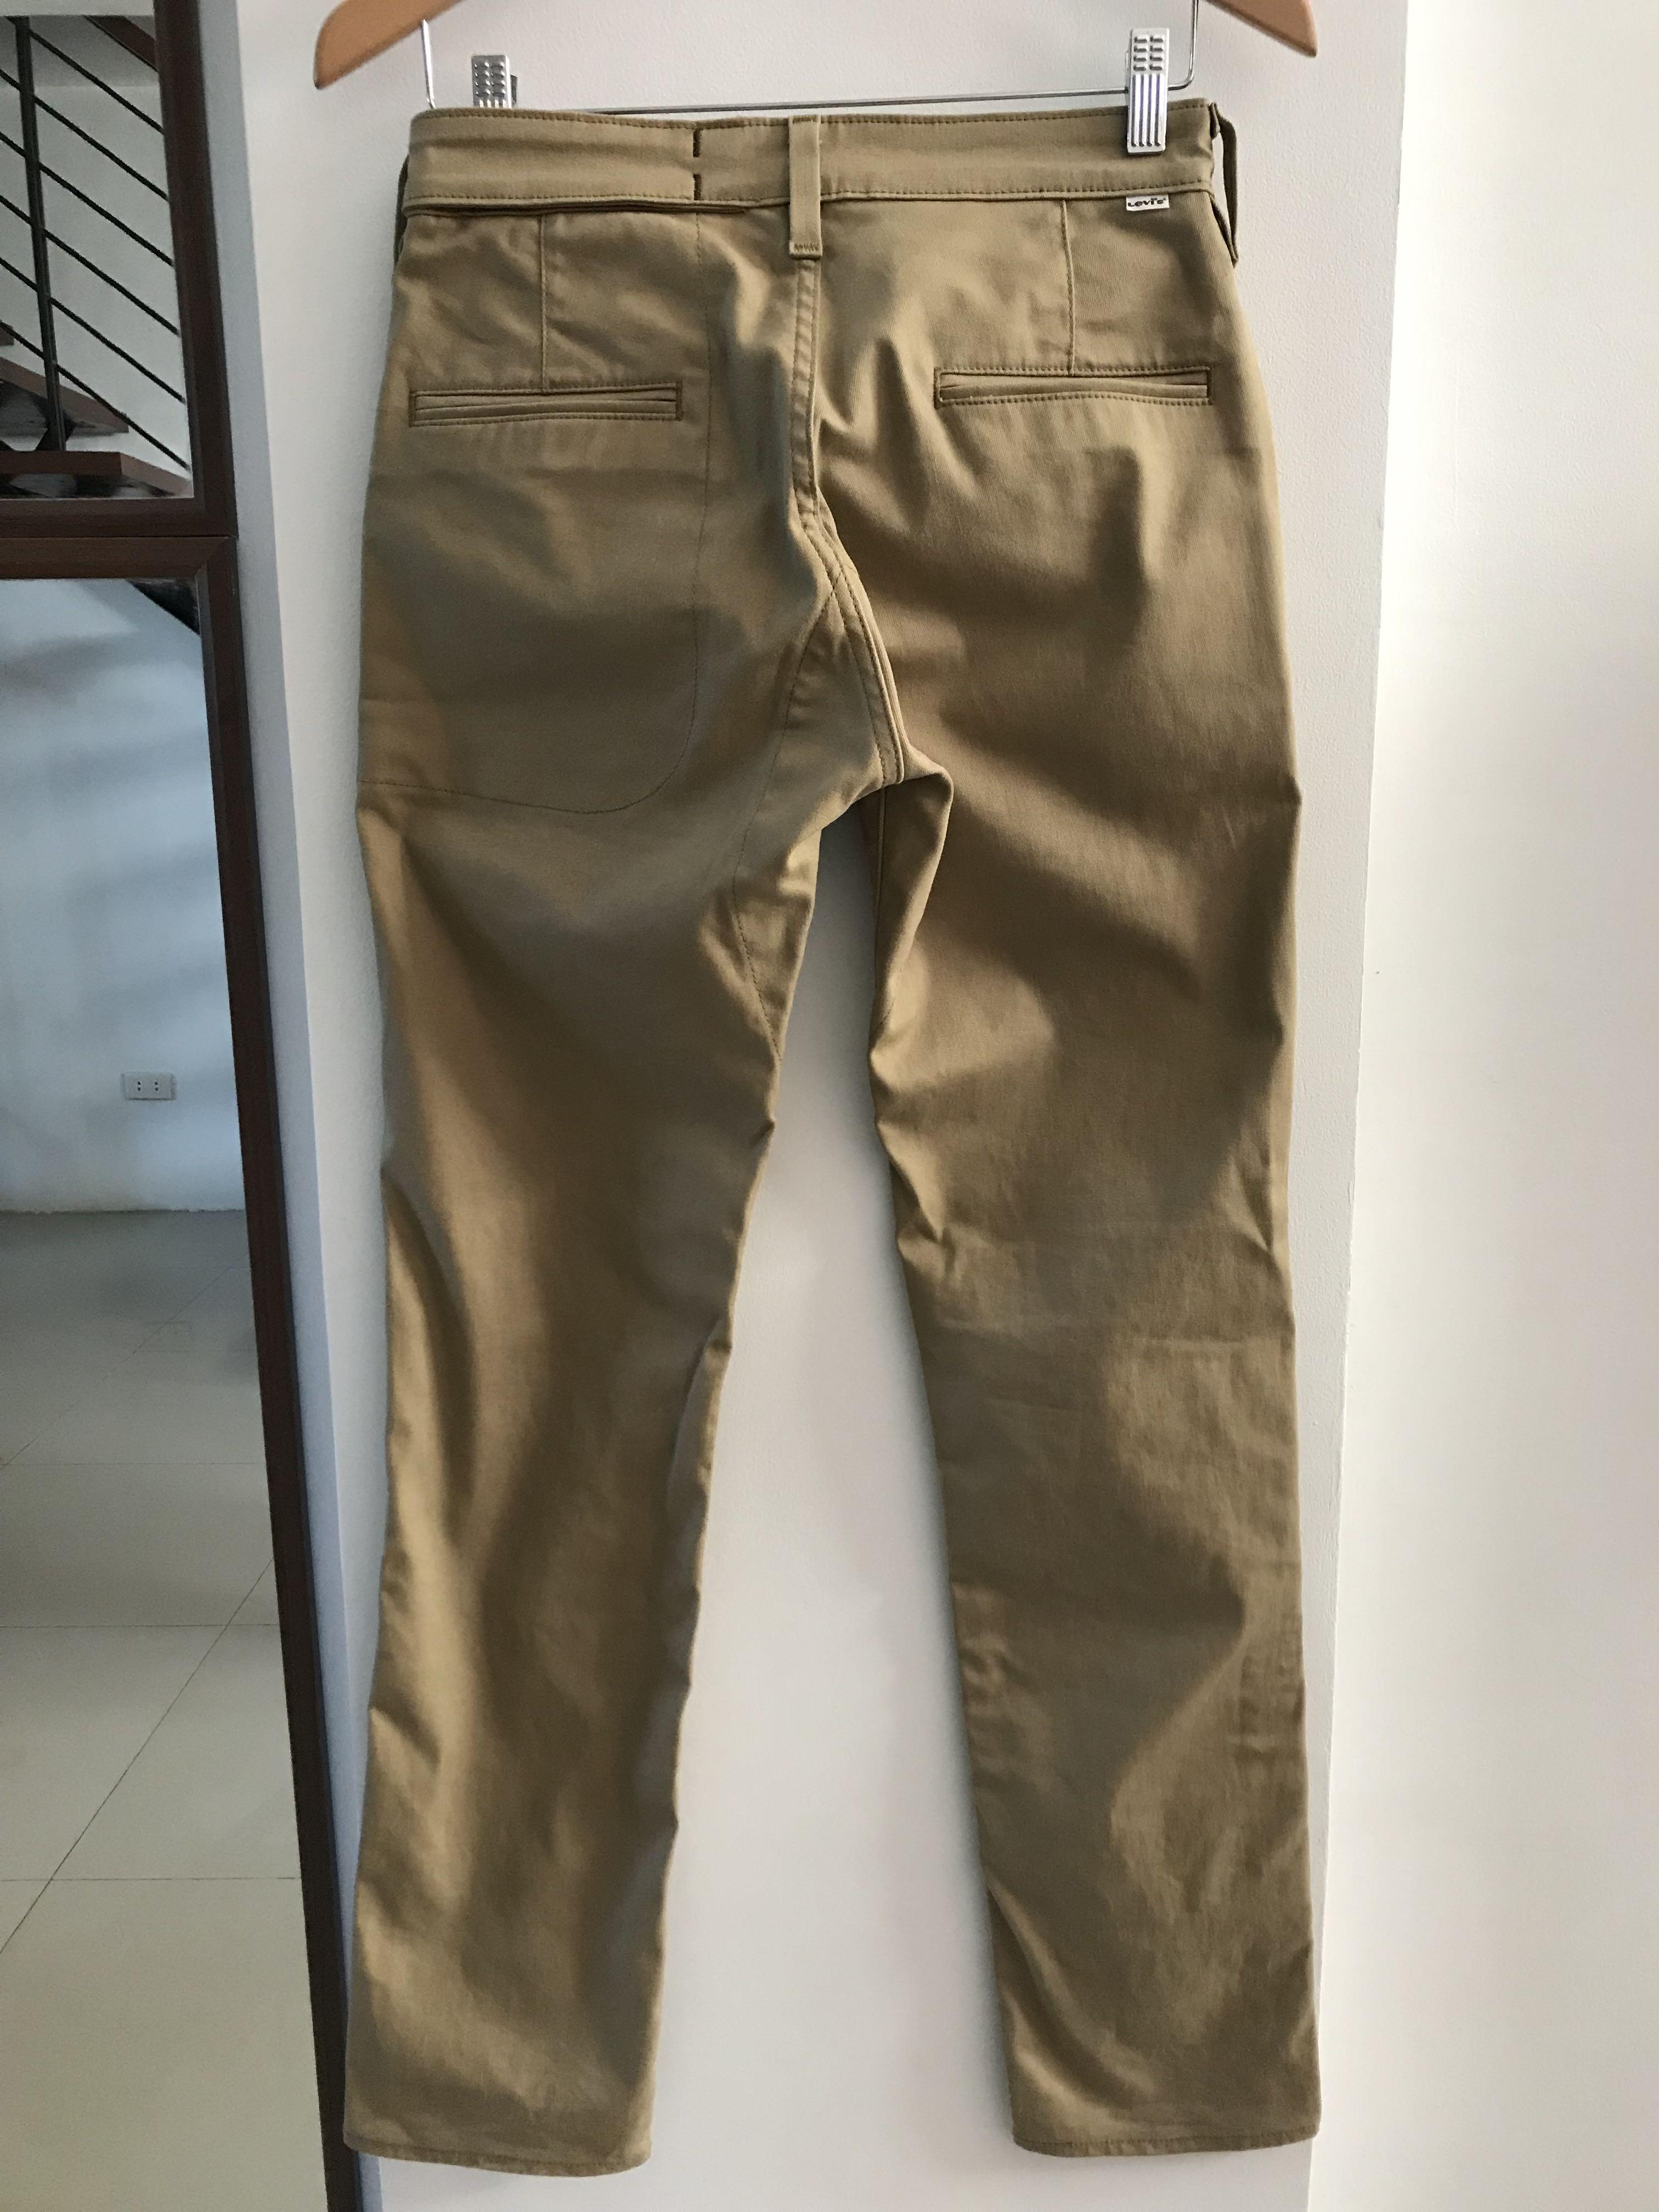 Levis Commuter Pants Size 28-29 stretch Length 40 inches, Men's Fashion,  Bottoms, Chinos on Carousell